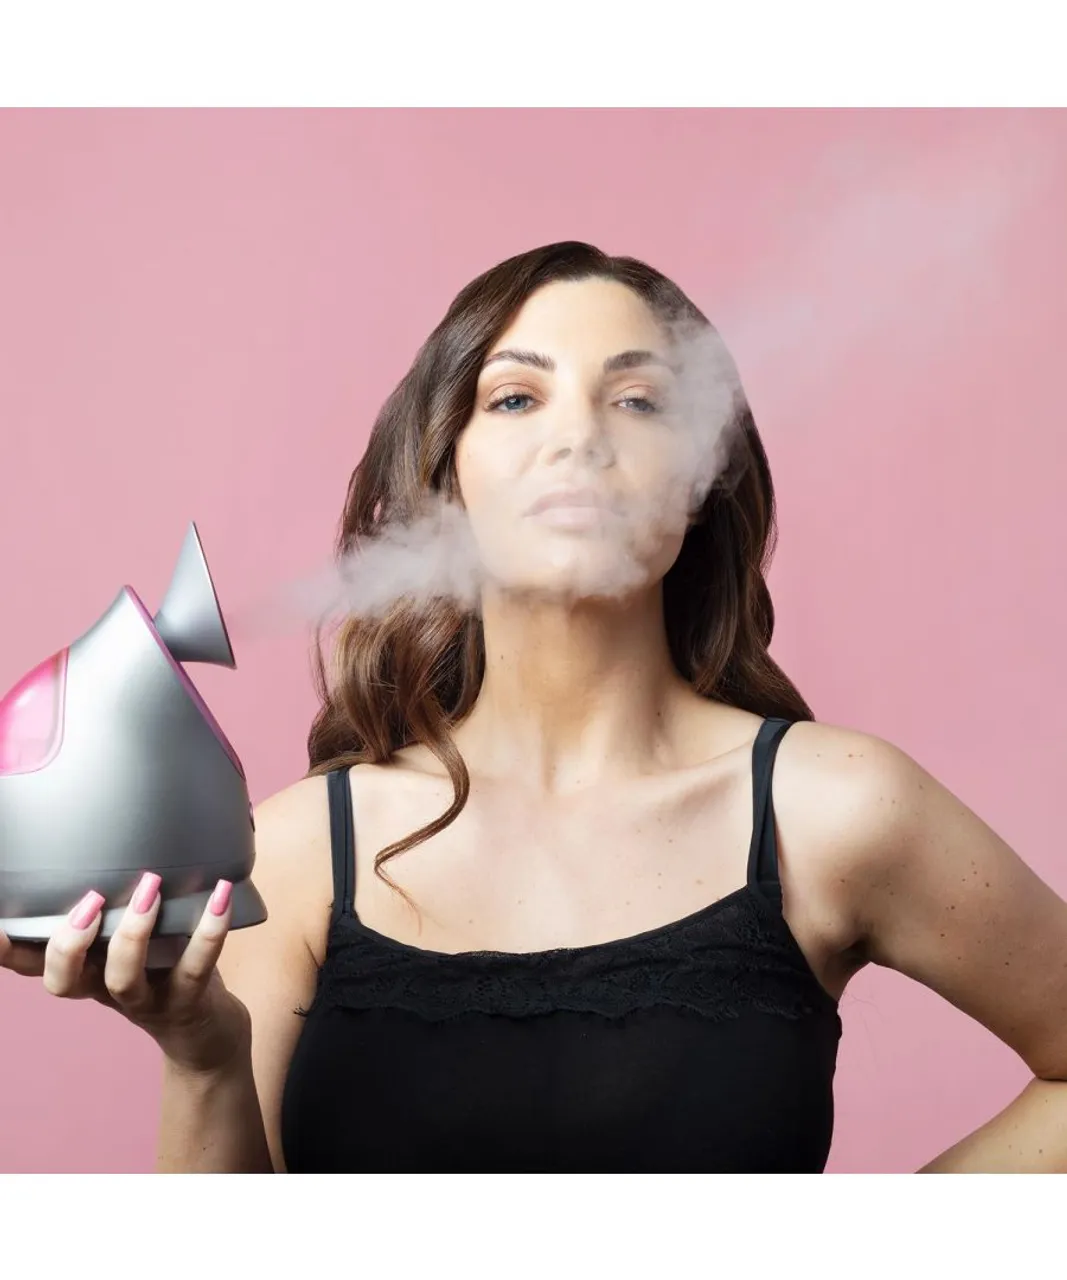 Envie Unisex Face Steamer with Hot Steaming Technology & Moisturizing for Women, Grey - Pink - One Size